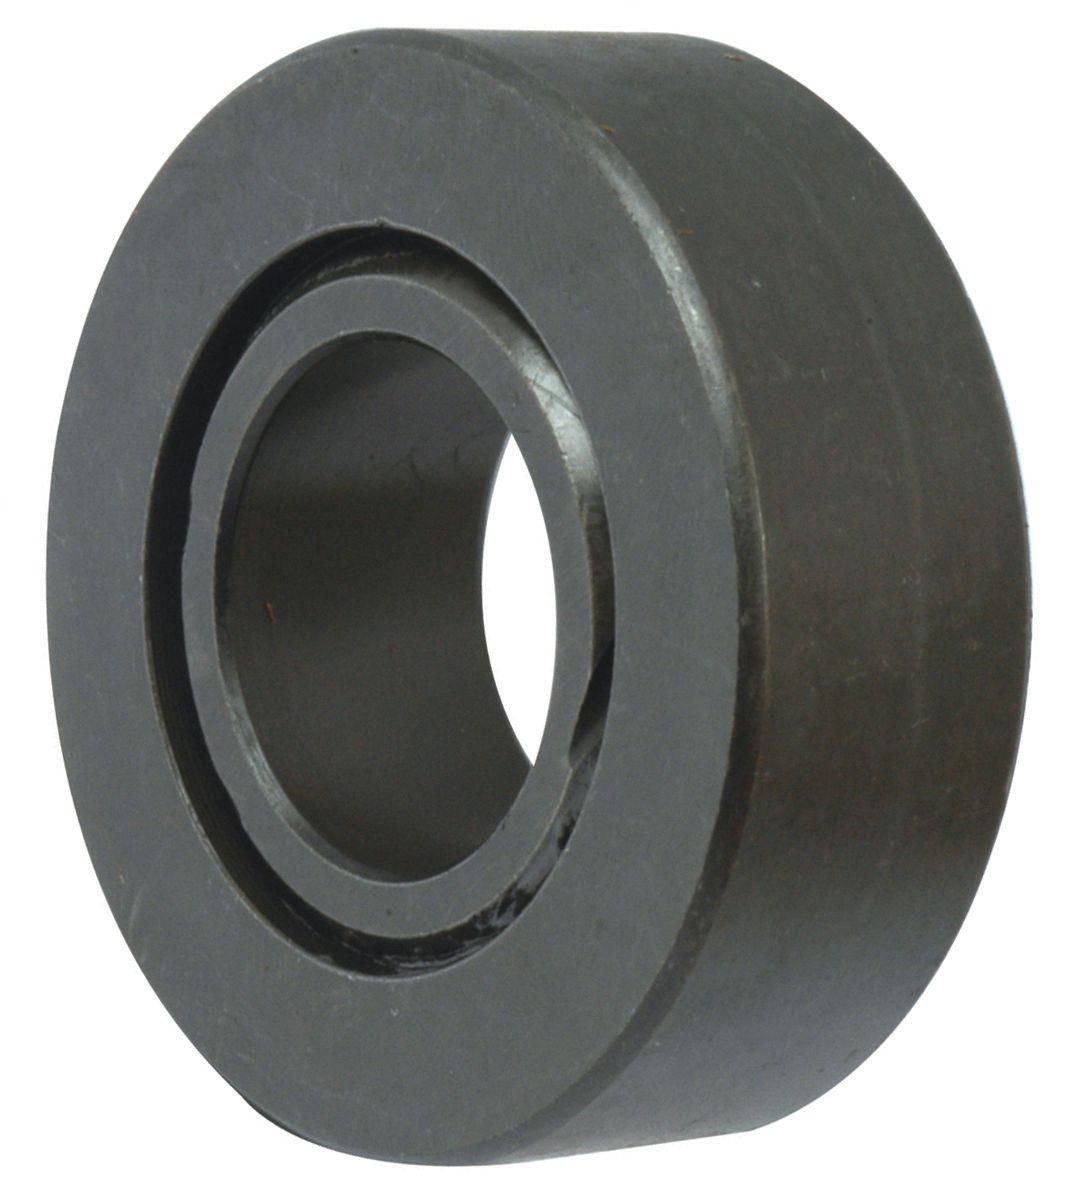 ALLIS CHALMERS TRUNION BEARING 62487